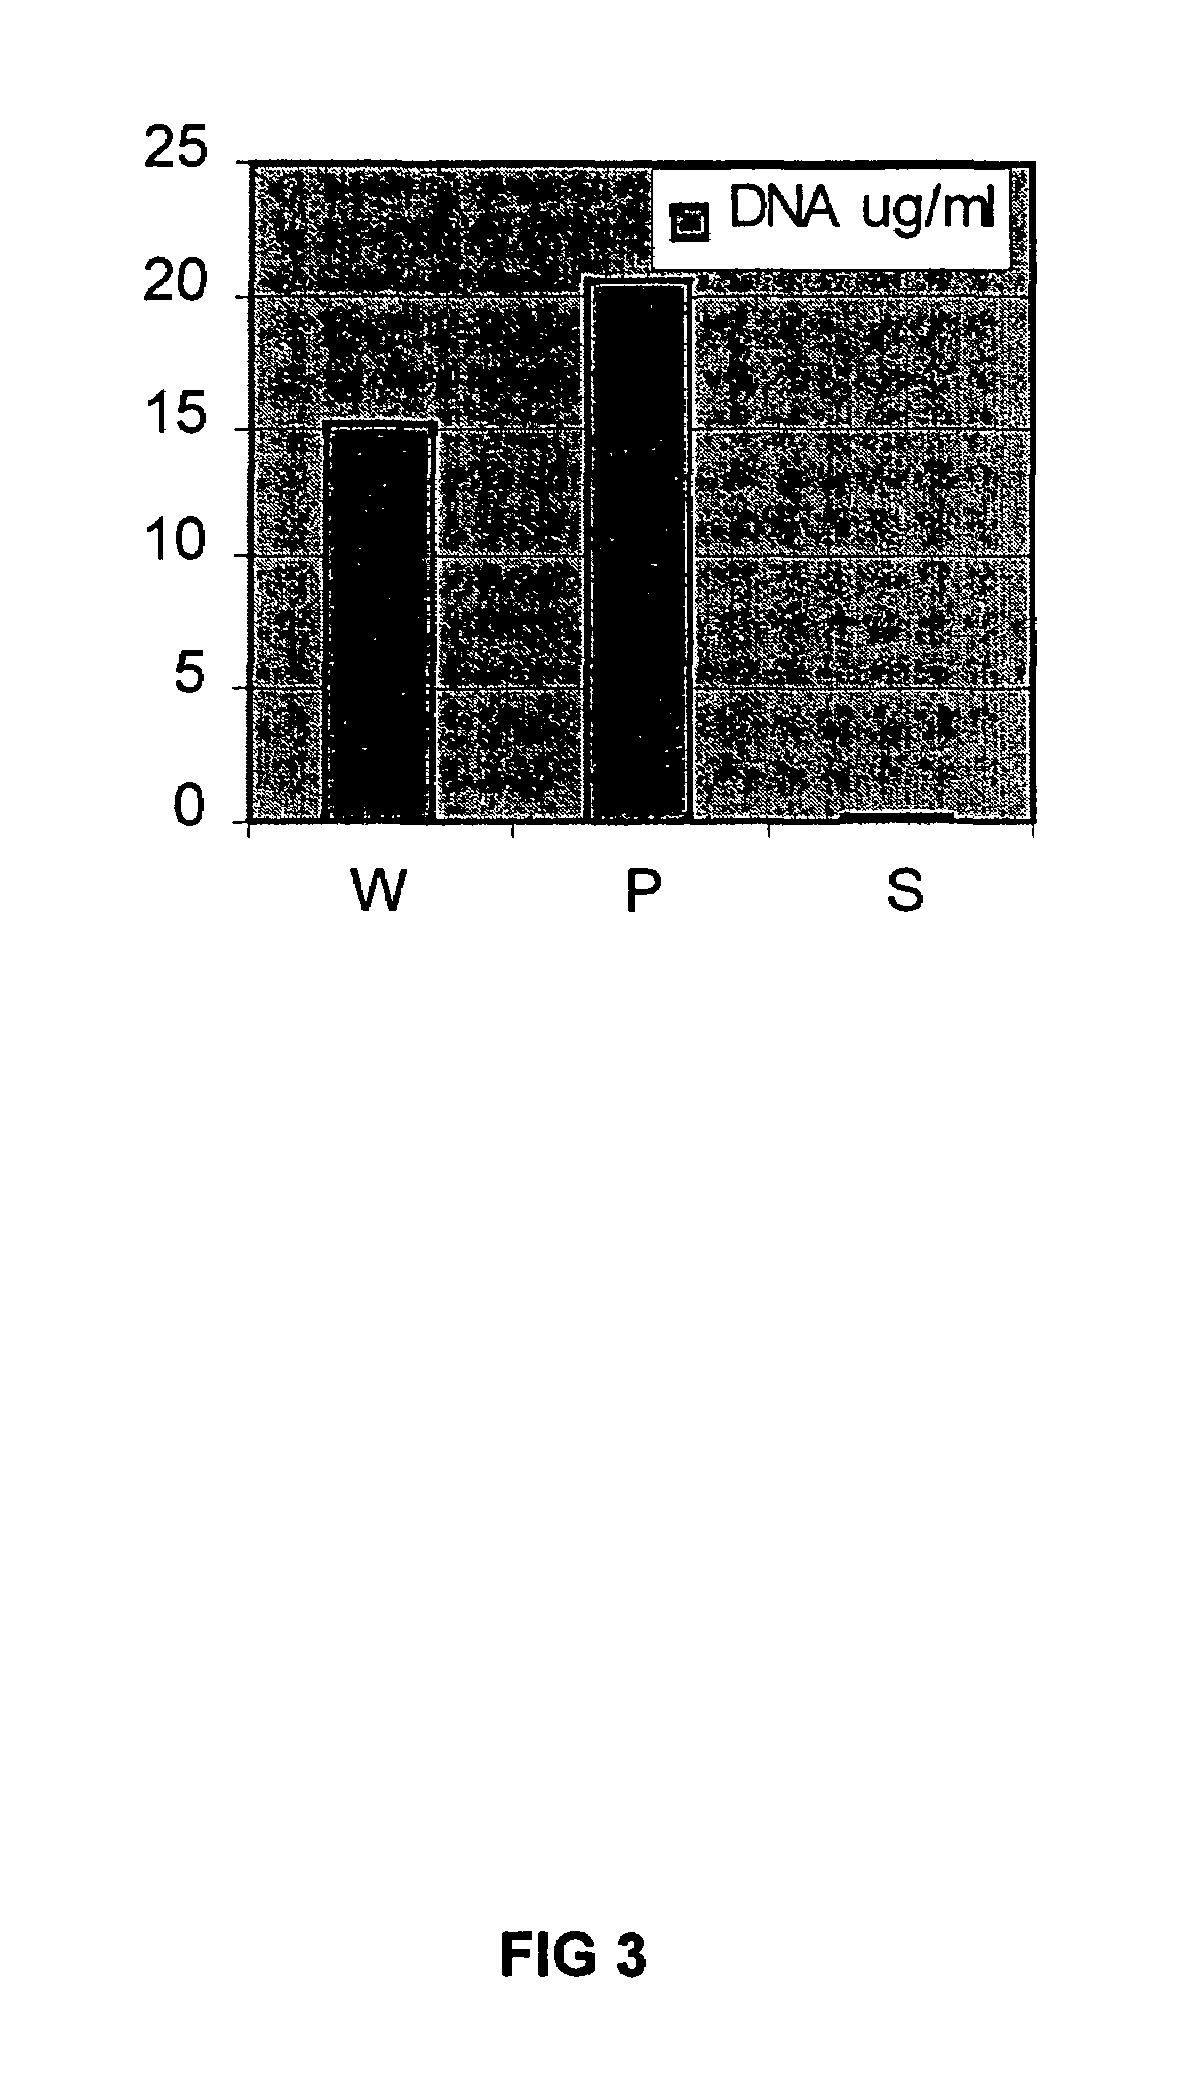 E. coli extract for protein synthesis